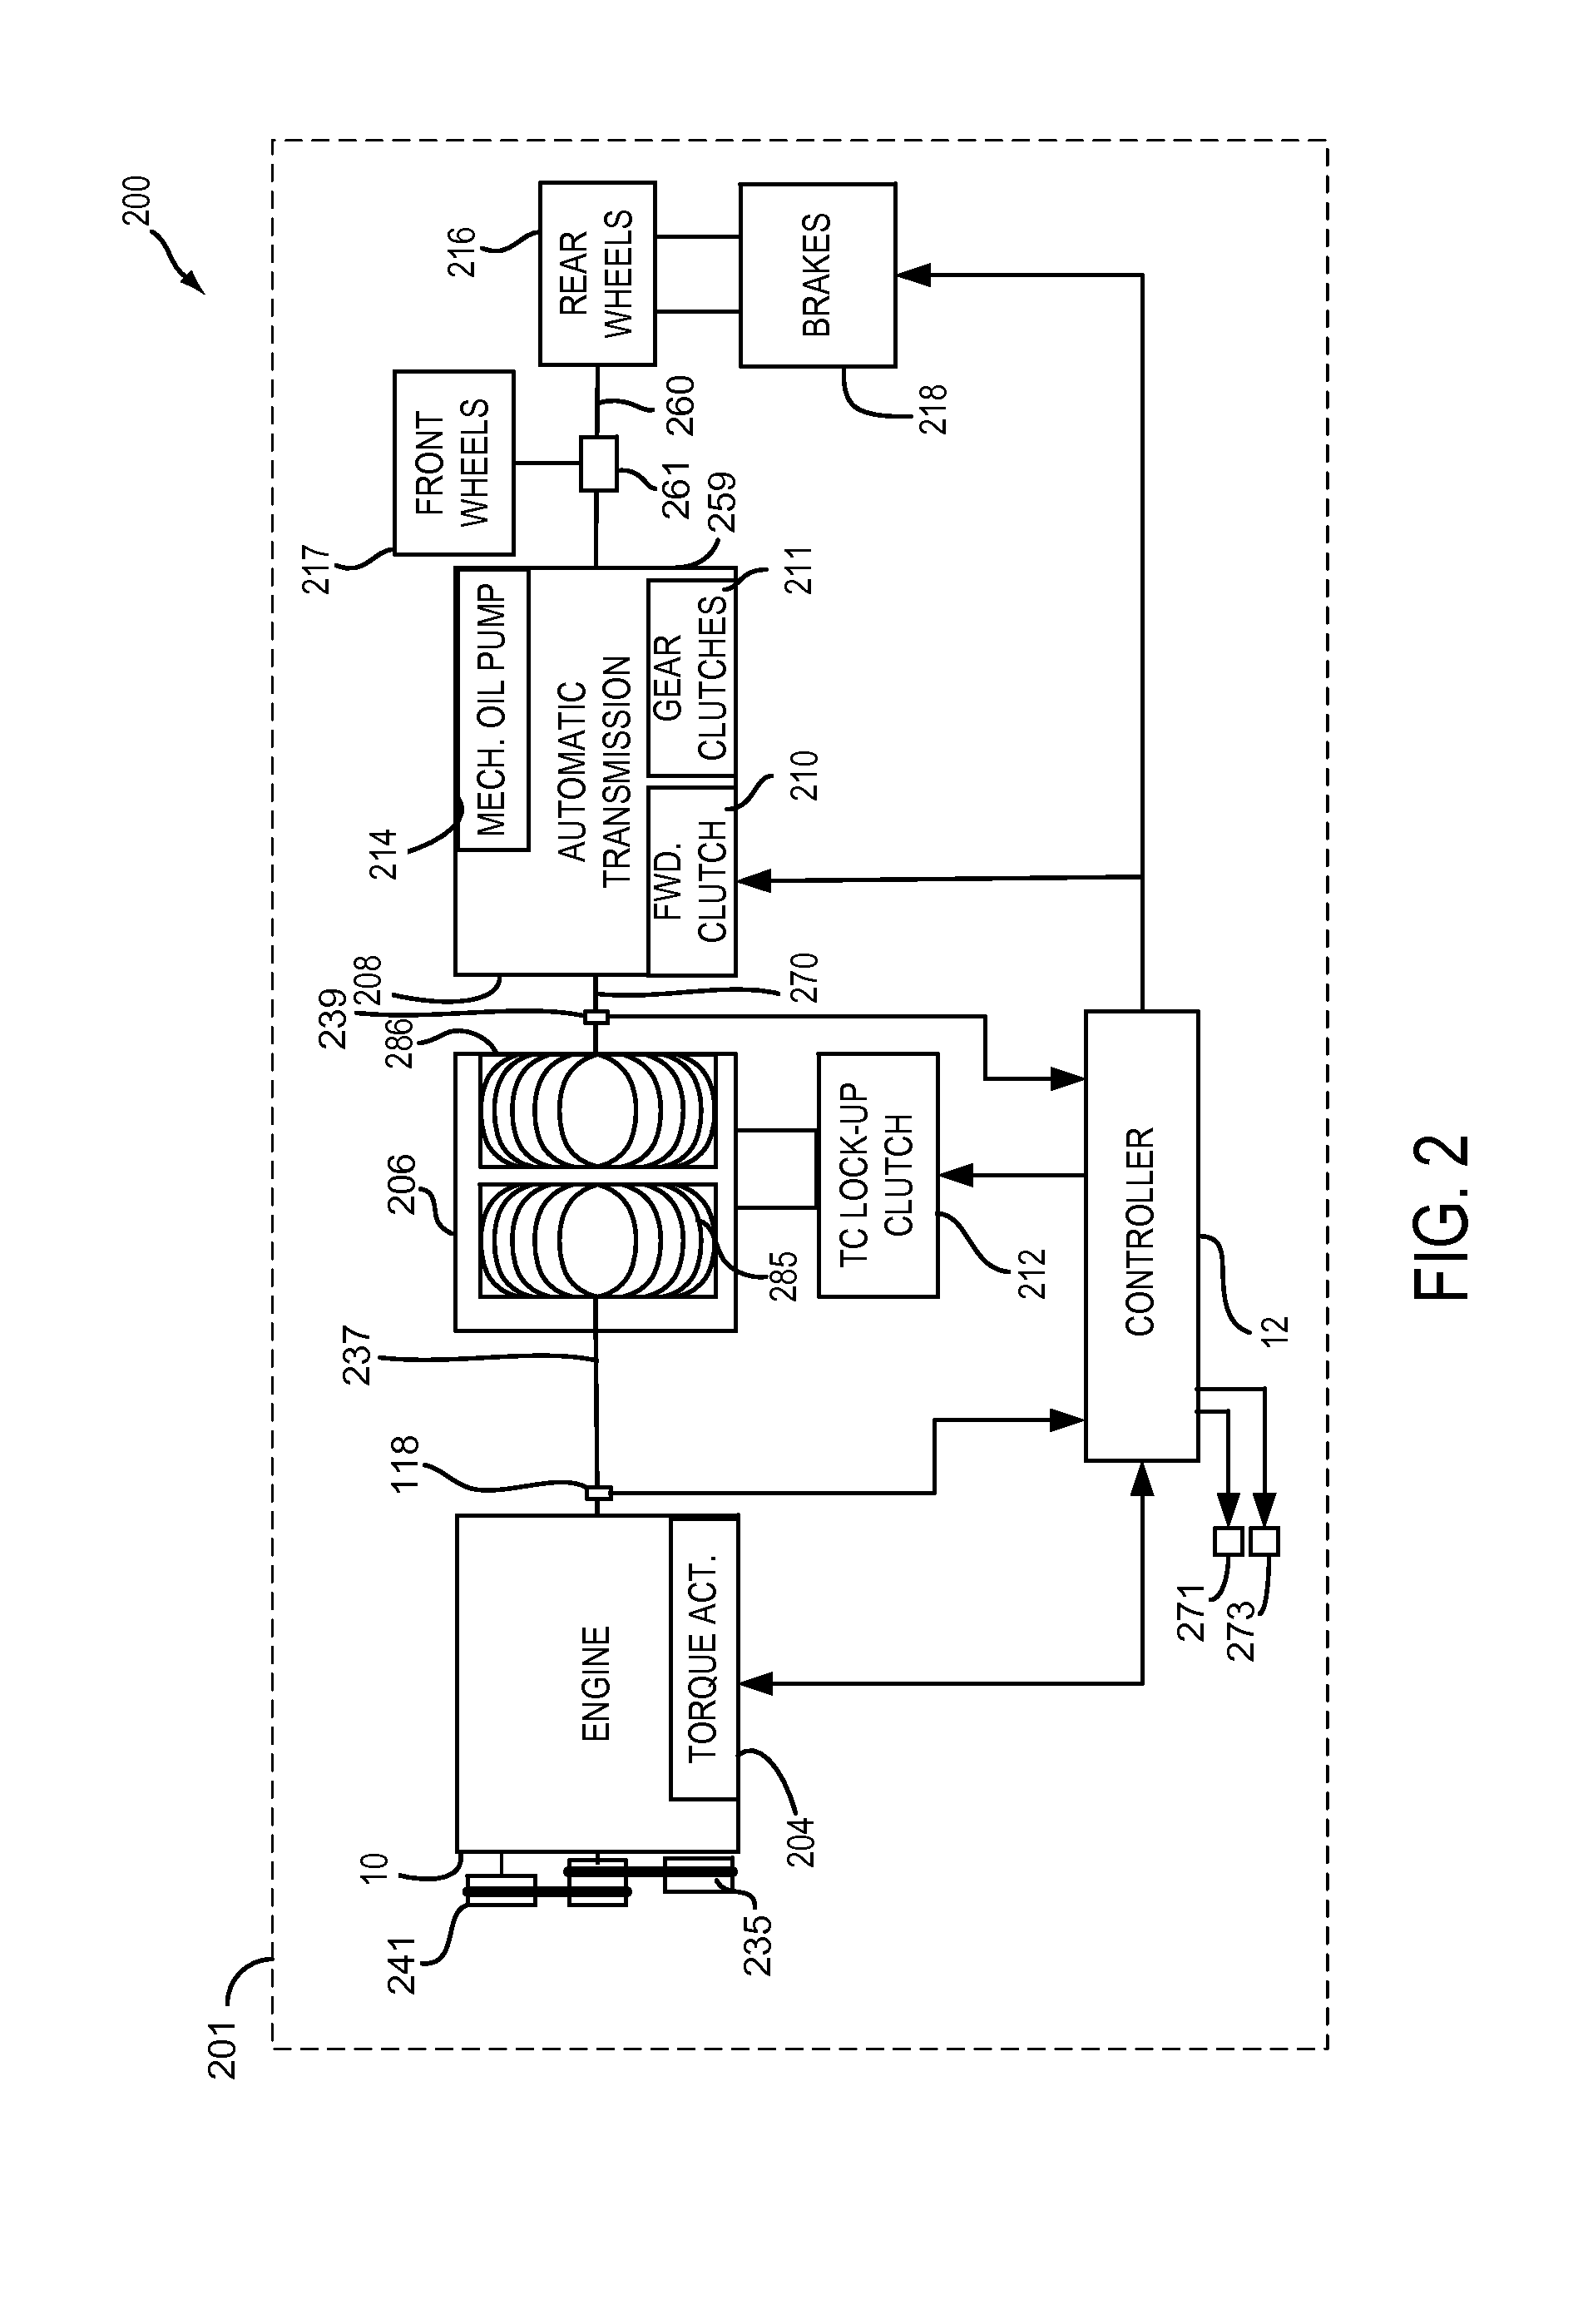 Method and system for providing vacuum for a vehicle